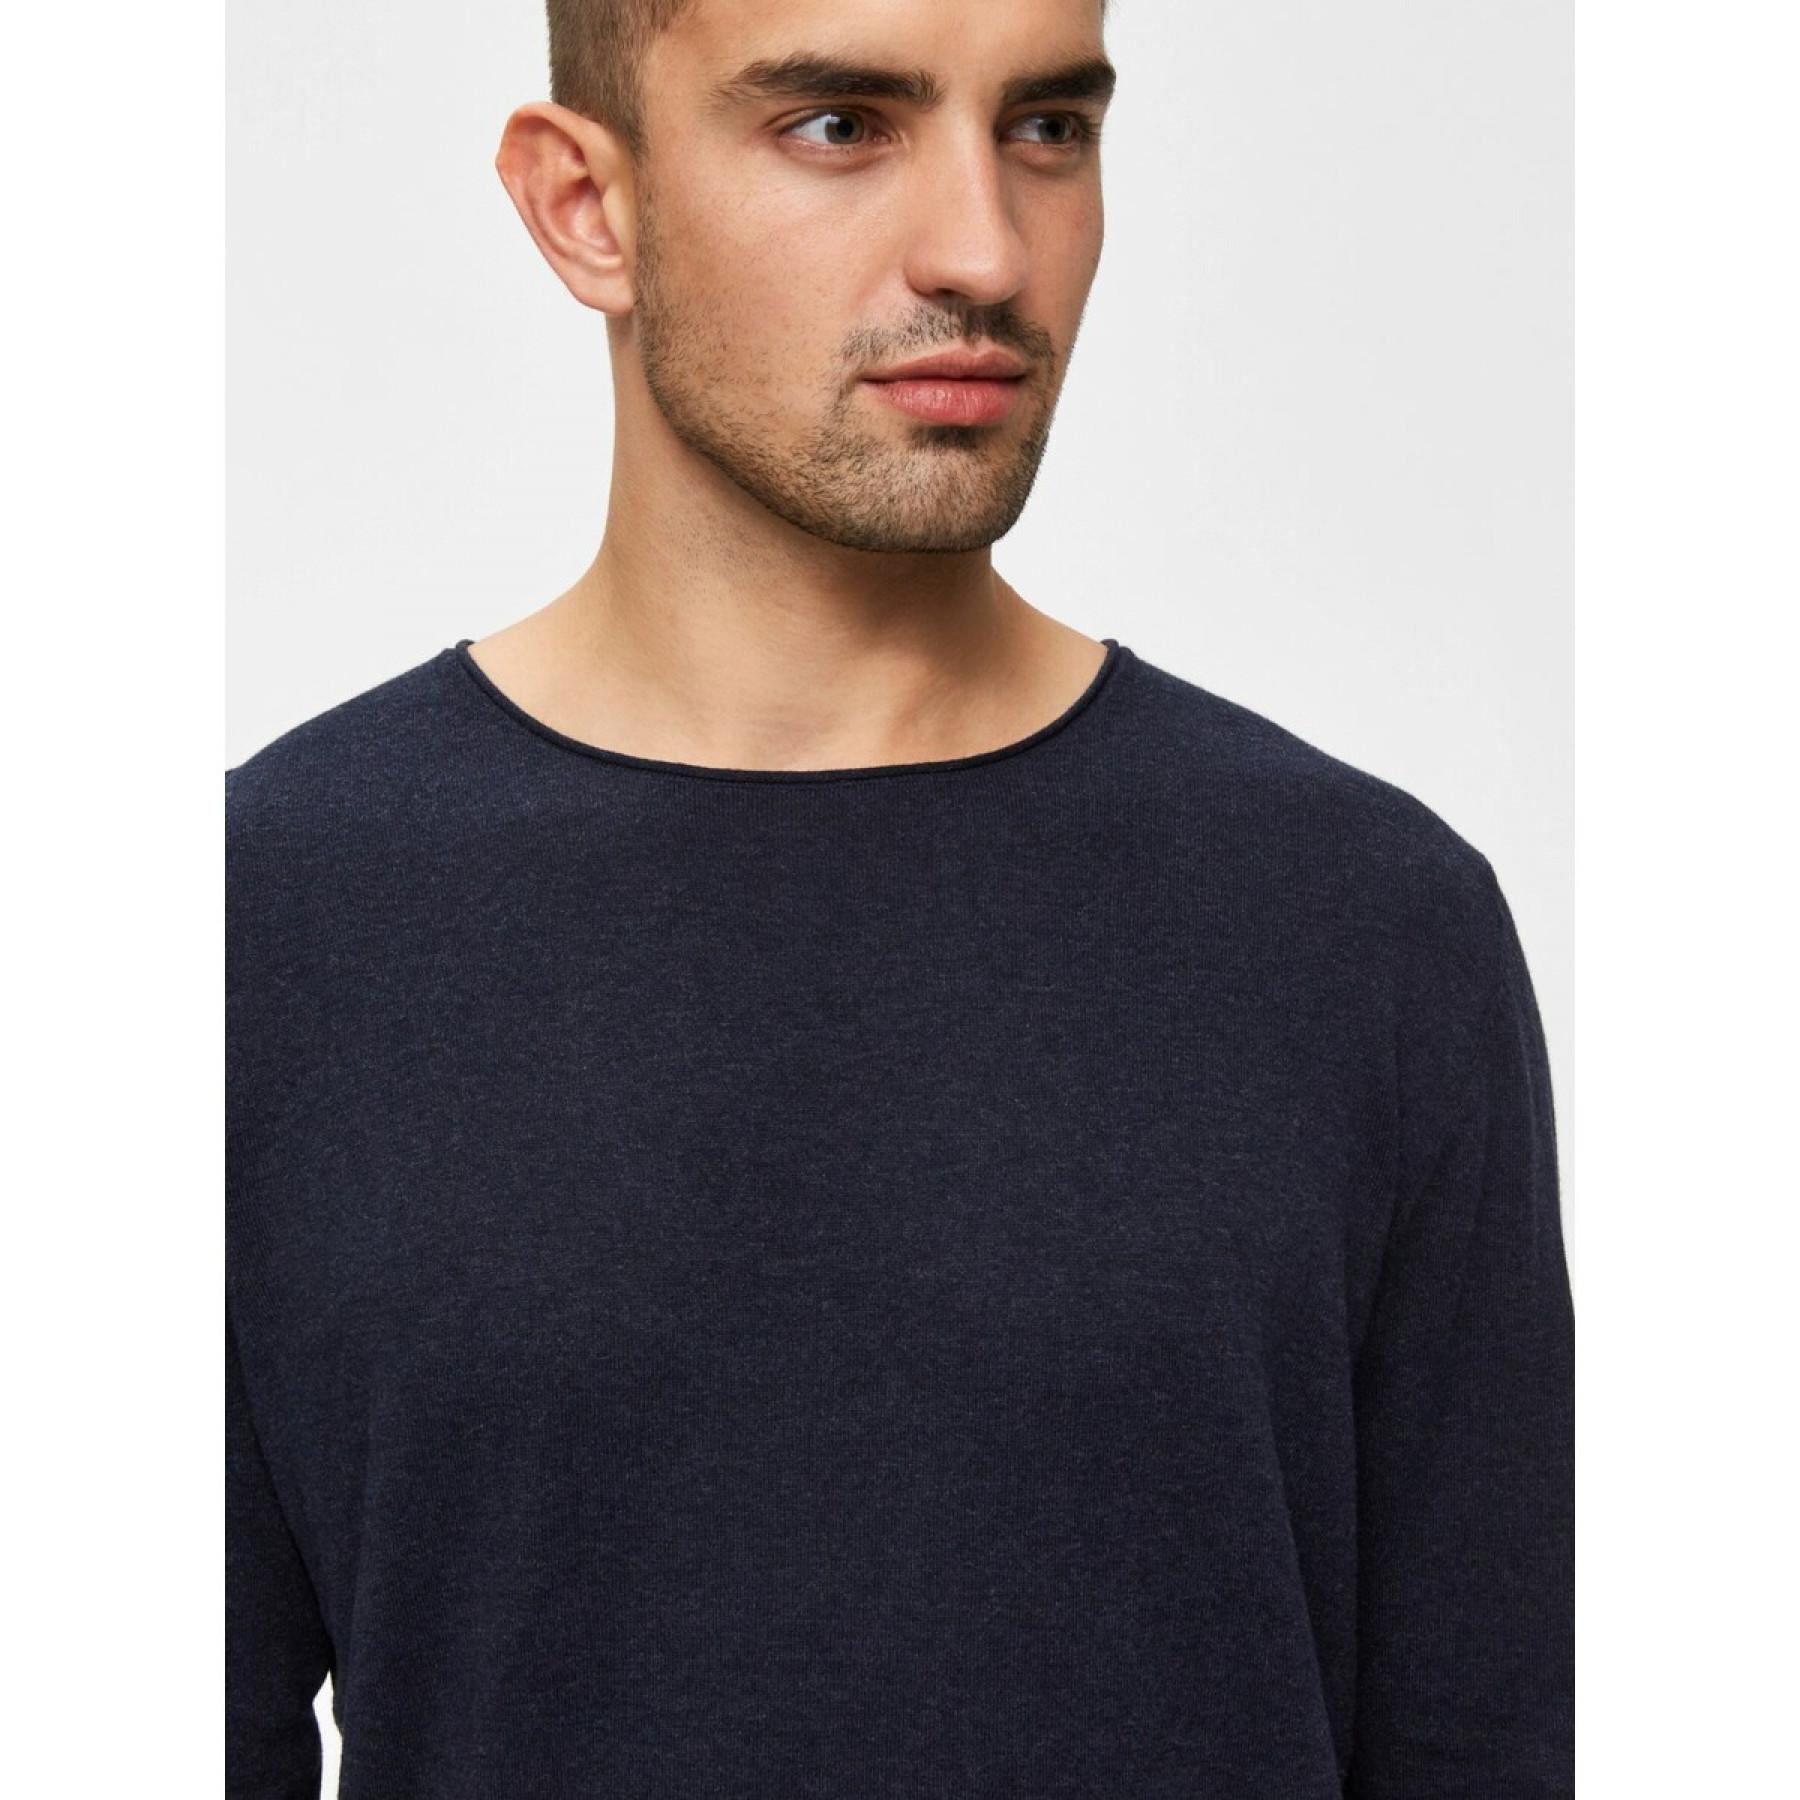 Jumper Selected Dome col rond